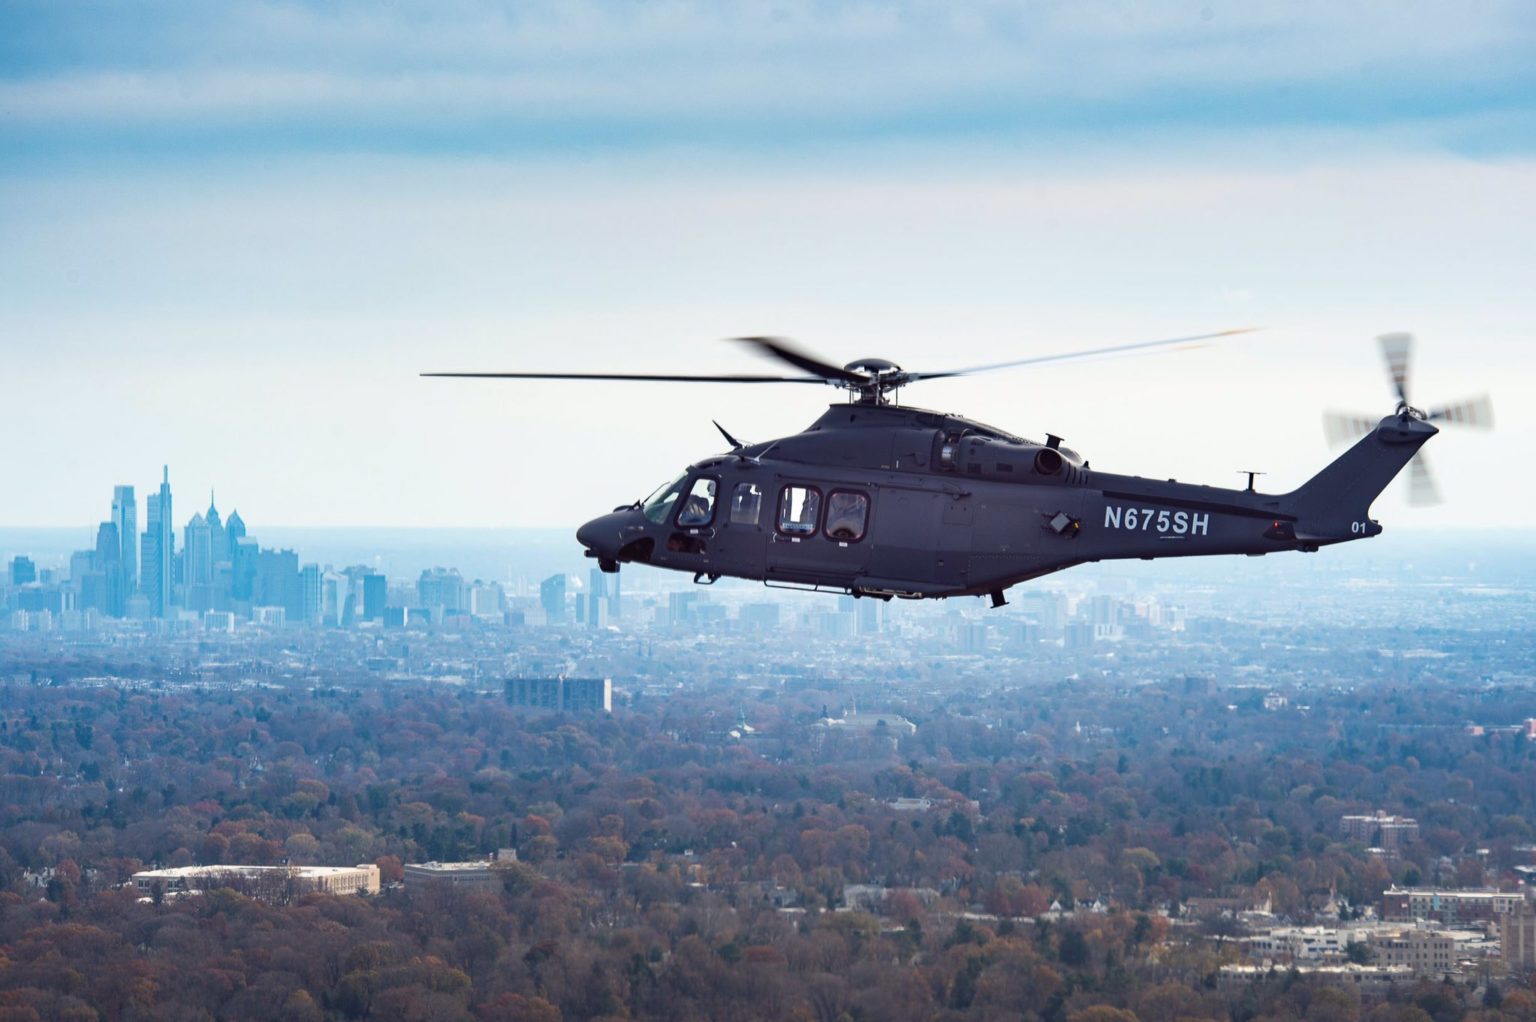 This MH-139A is the Air Force’s replacement for the Huey